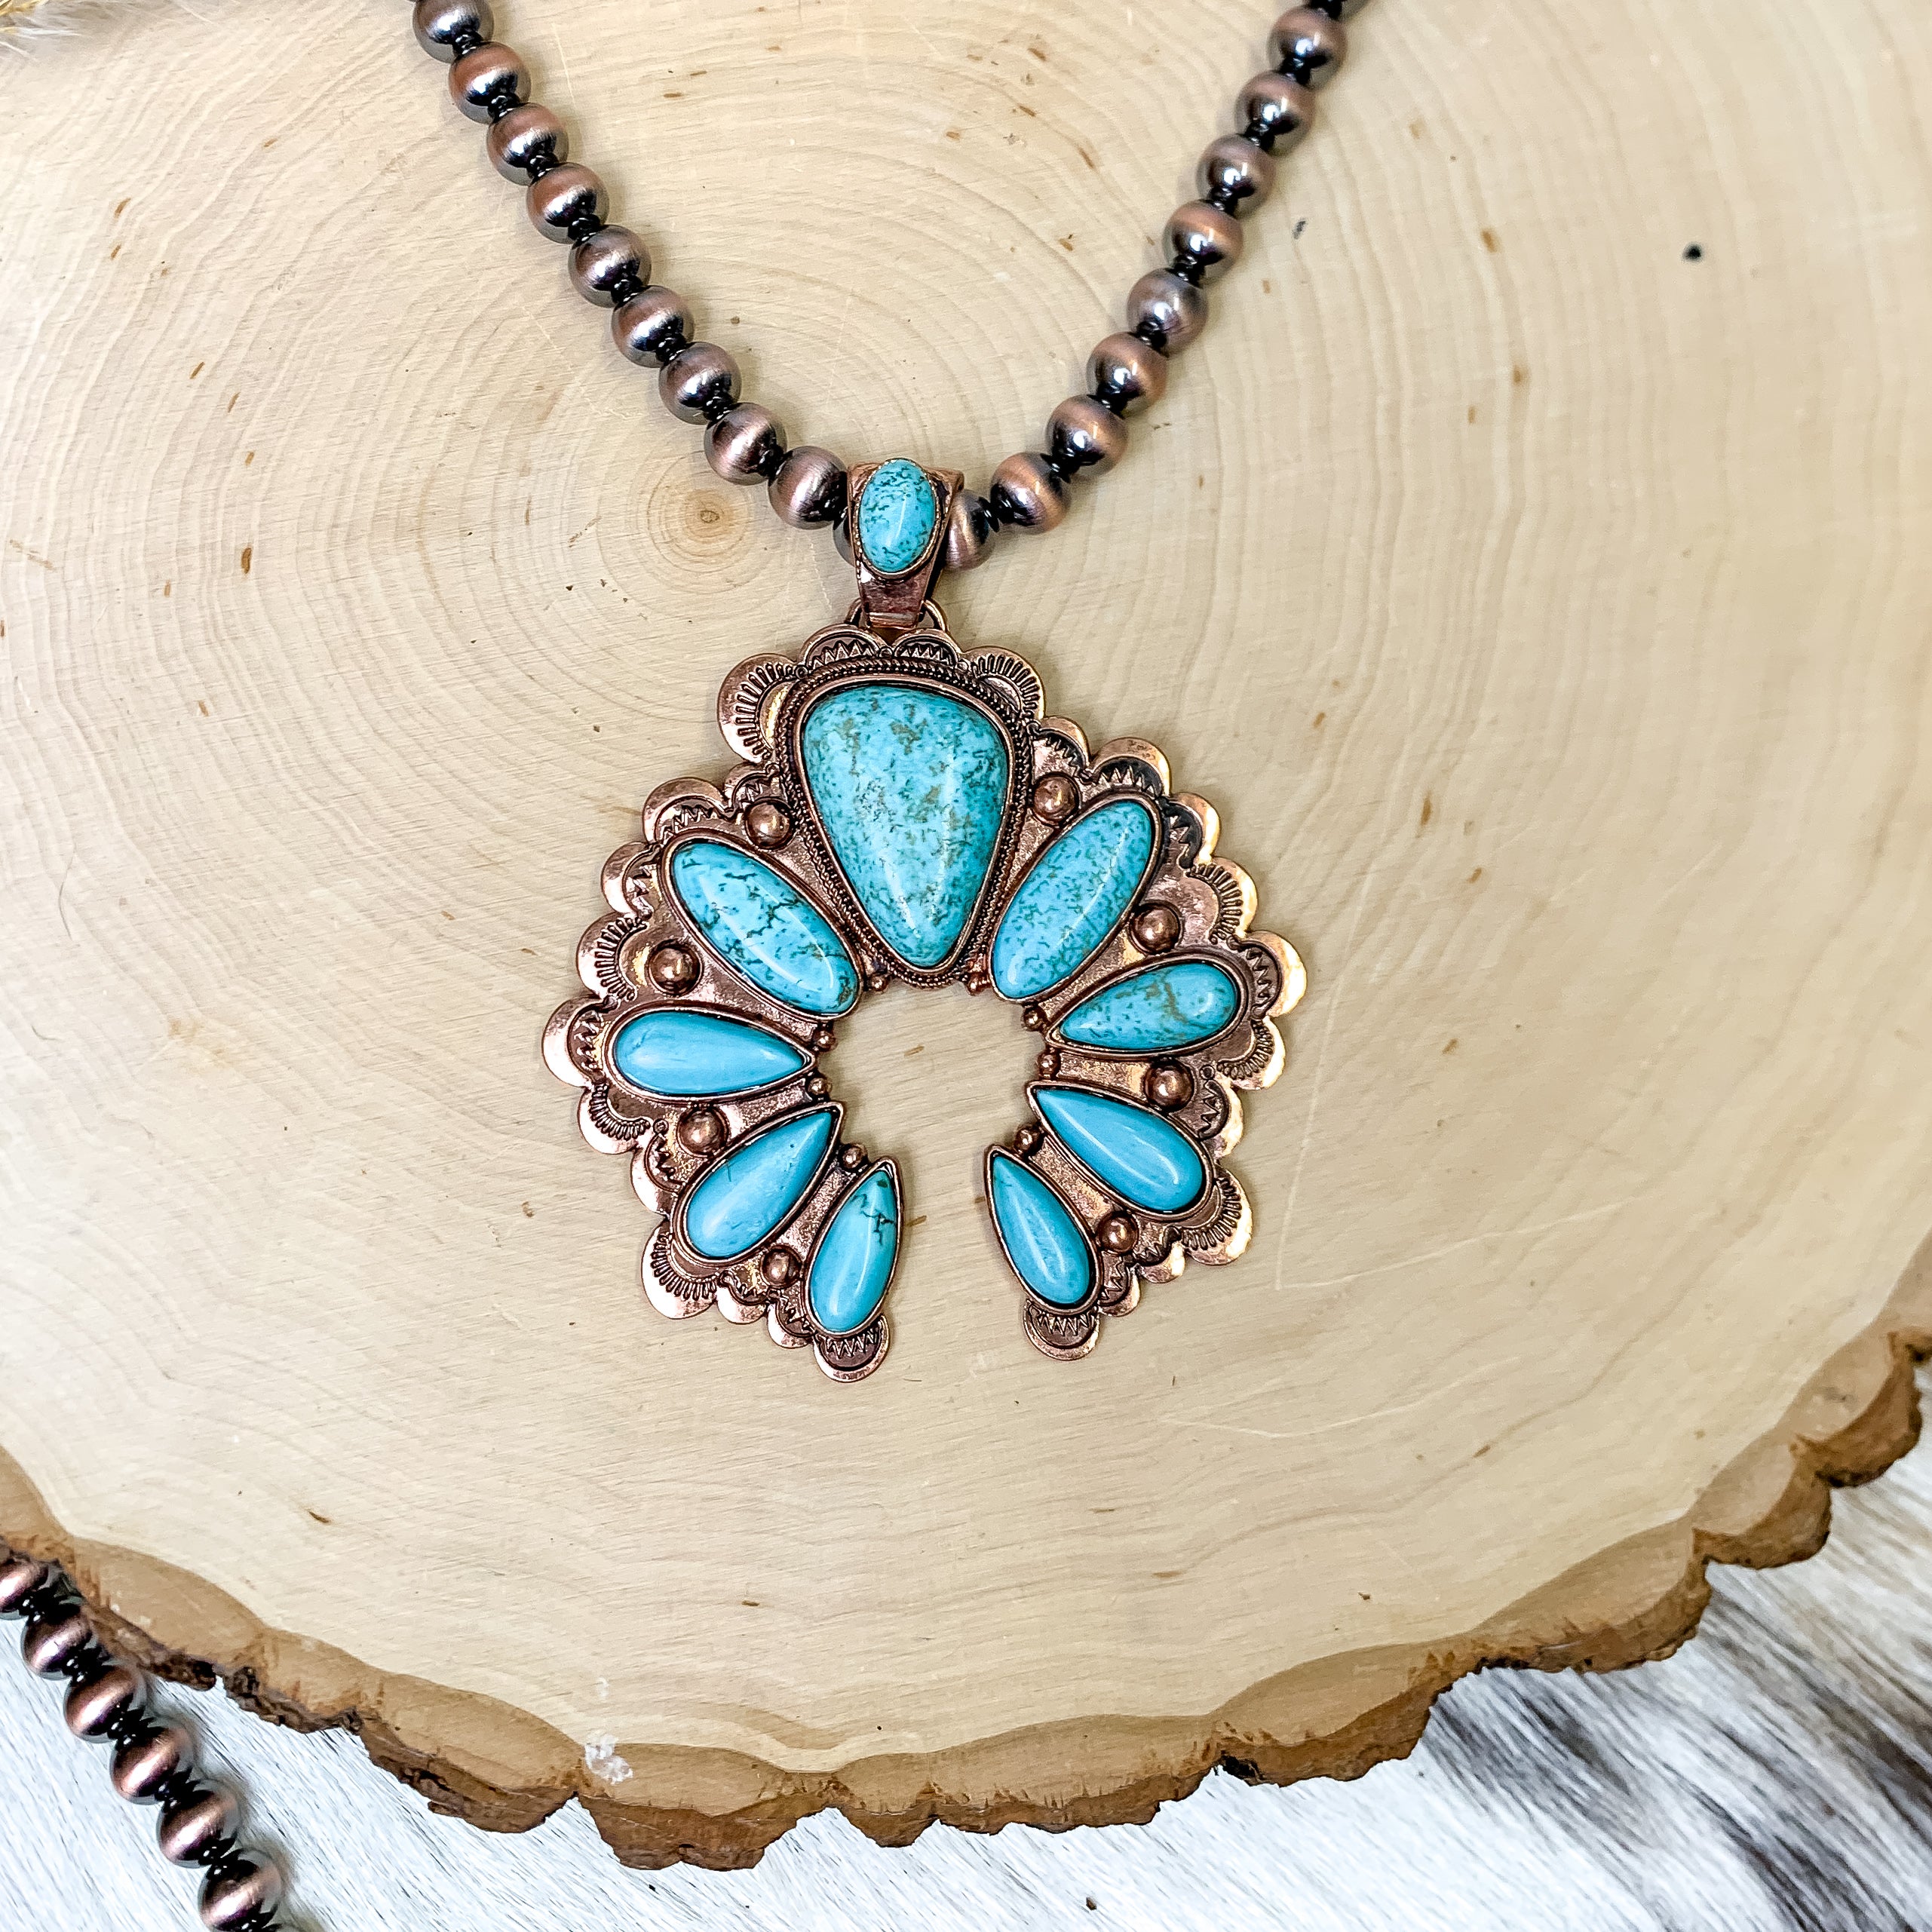 Copper Tone Faux Navajo Pearl Necklace With Stones and Naja Pendant in Turquoise Blue